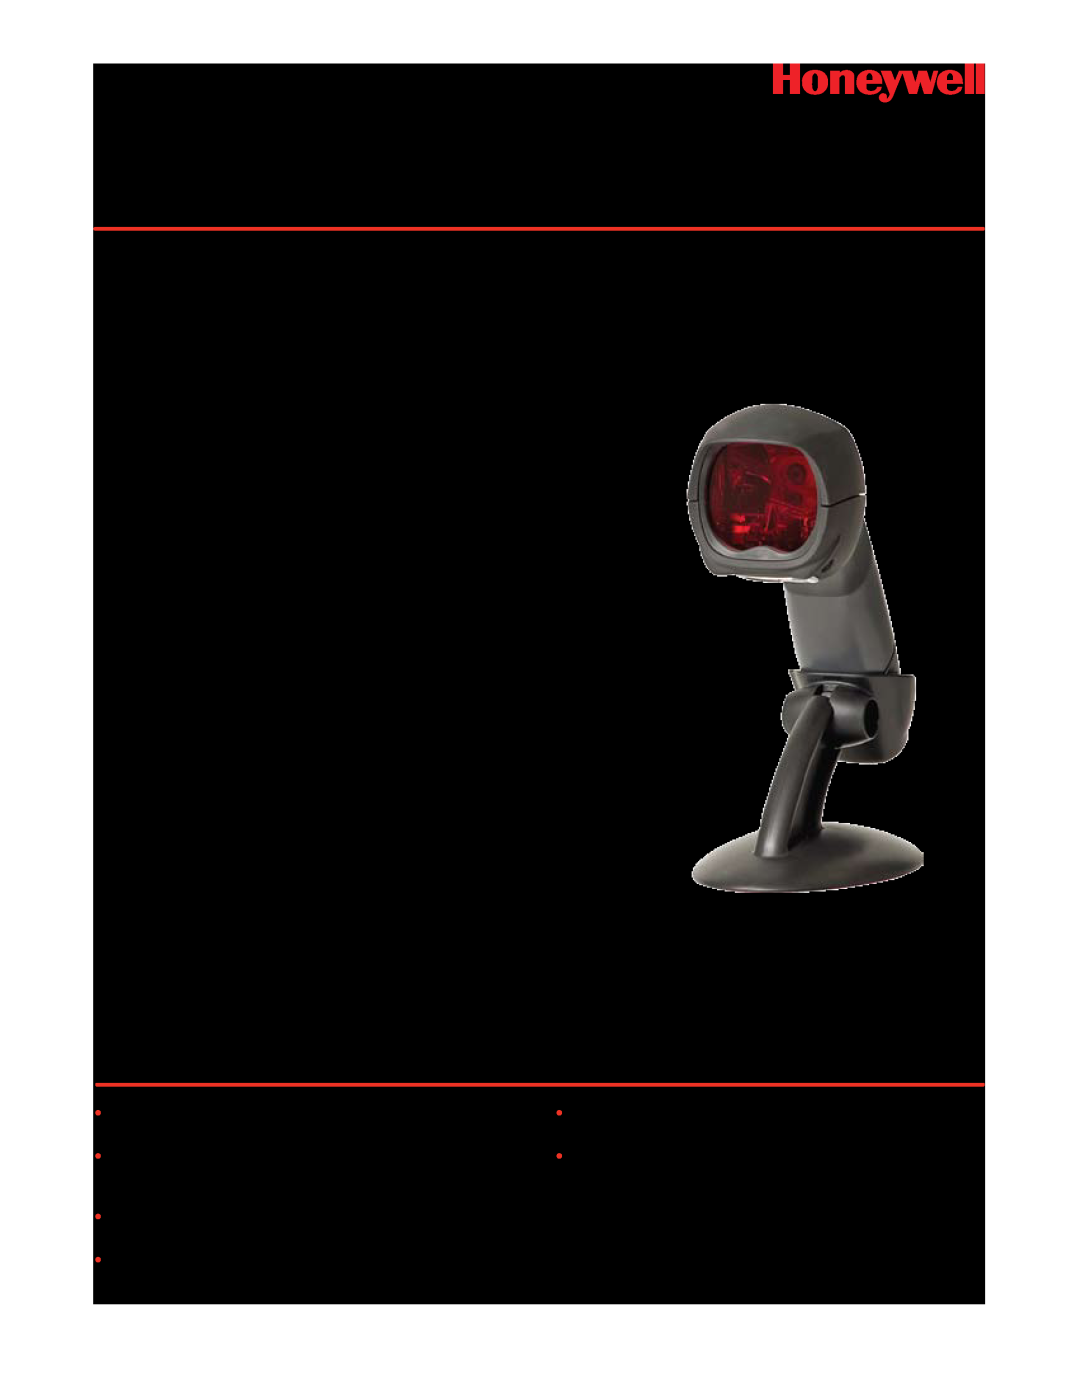 Hand Held Products manual MS3780 Fusion, Omnidirectional Laser Scanner, Features 